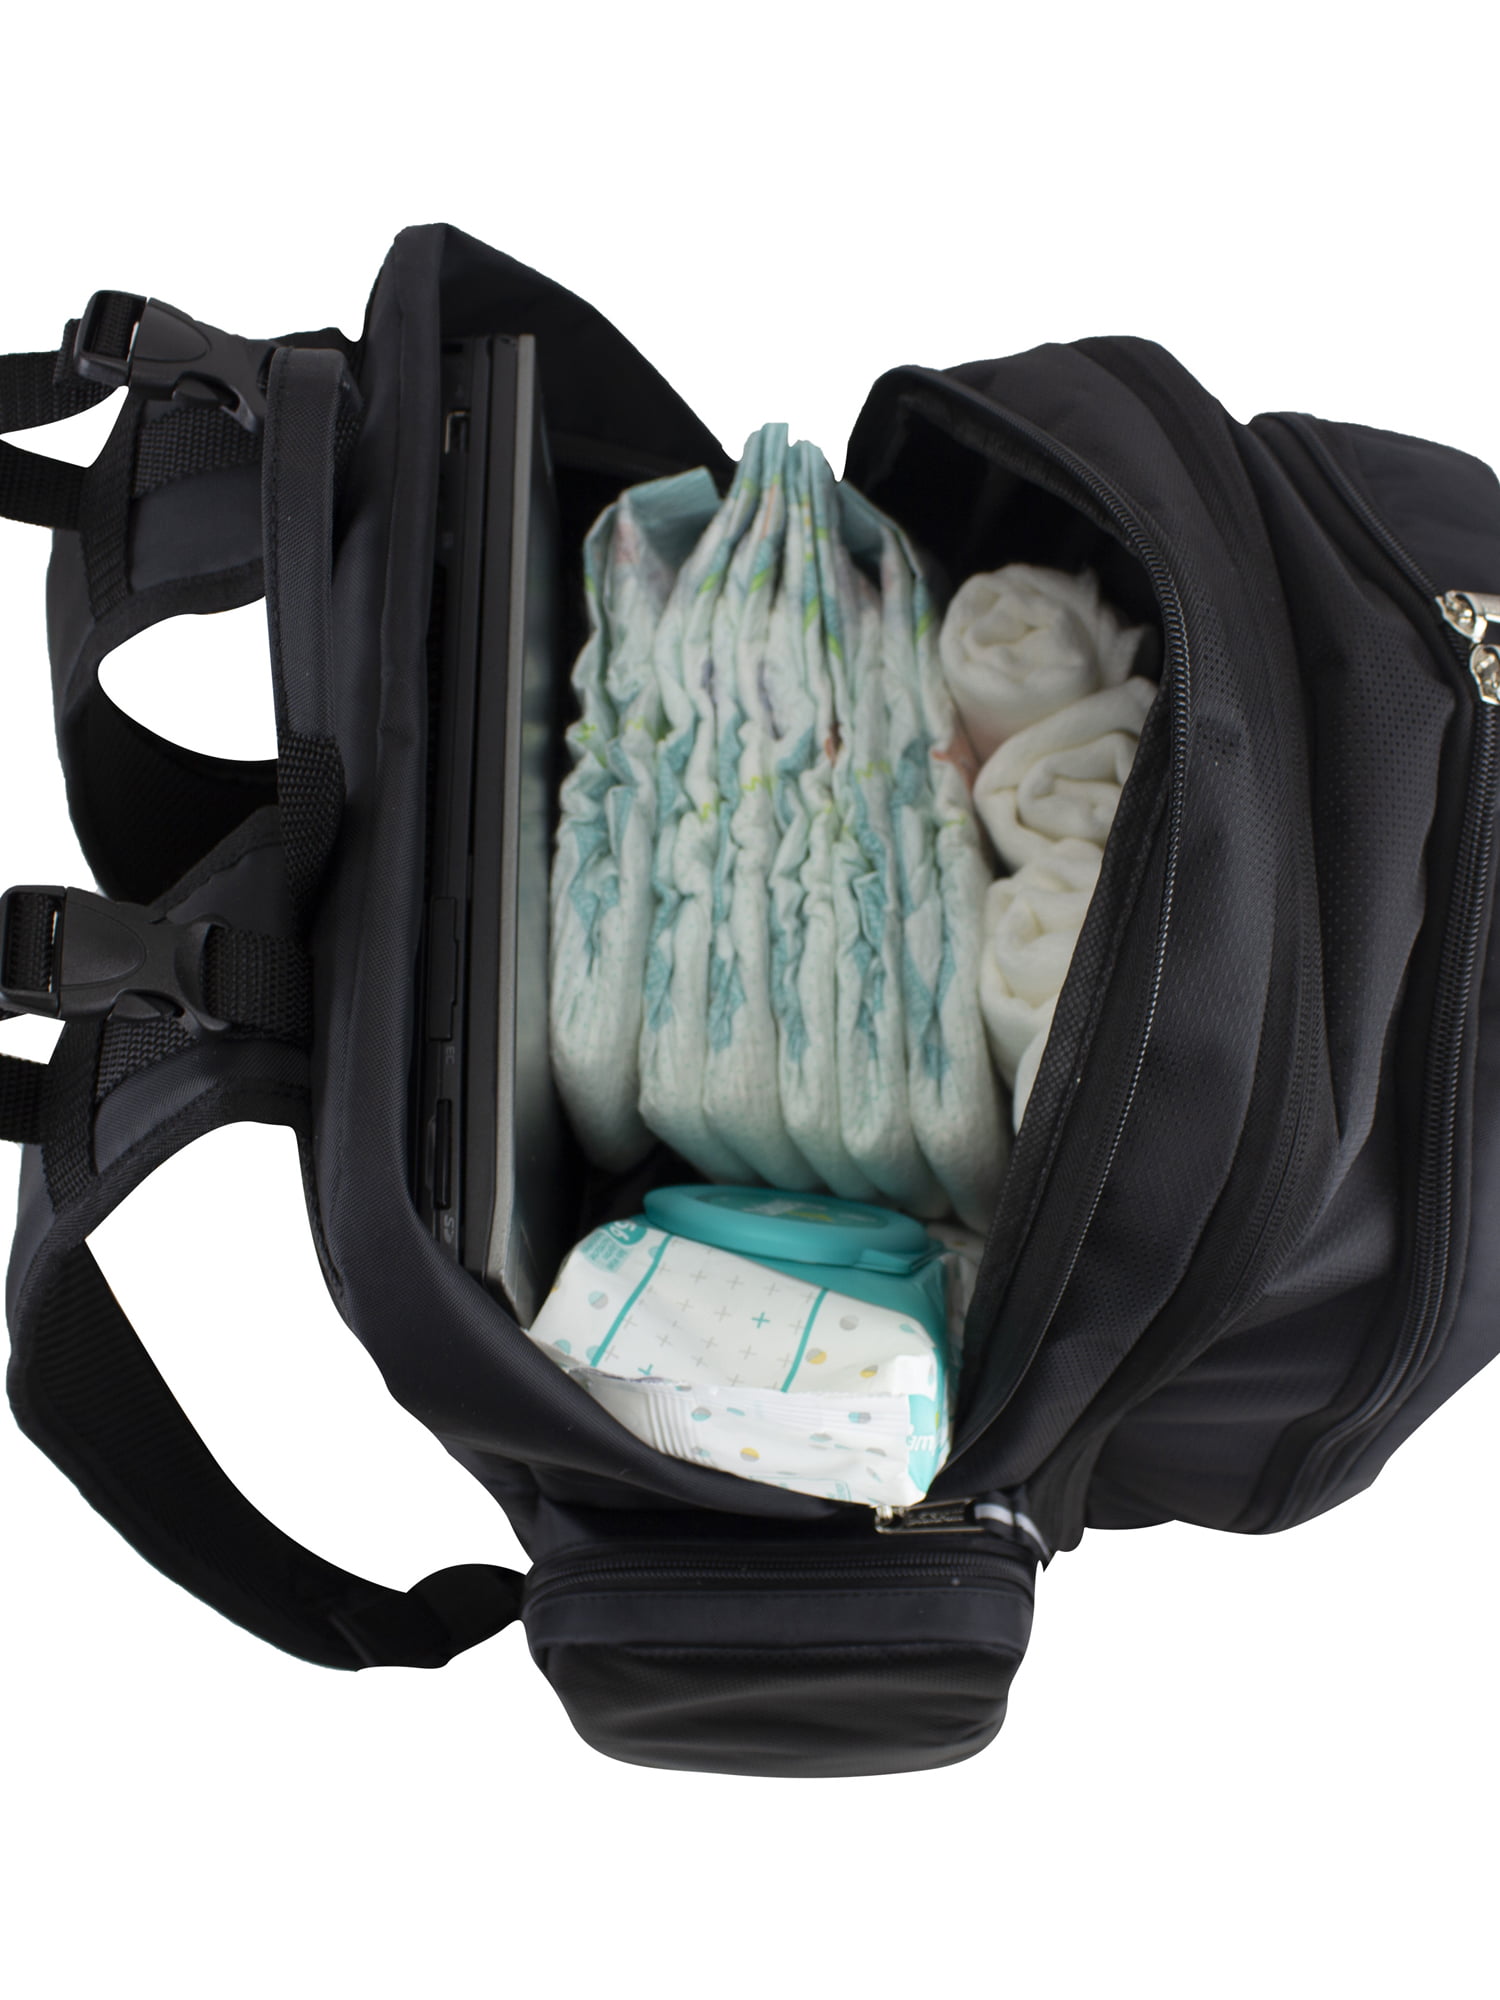 Eastsport Madison Diaper Backpack with Bonus Changing Pad, Turquoise